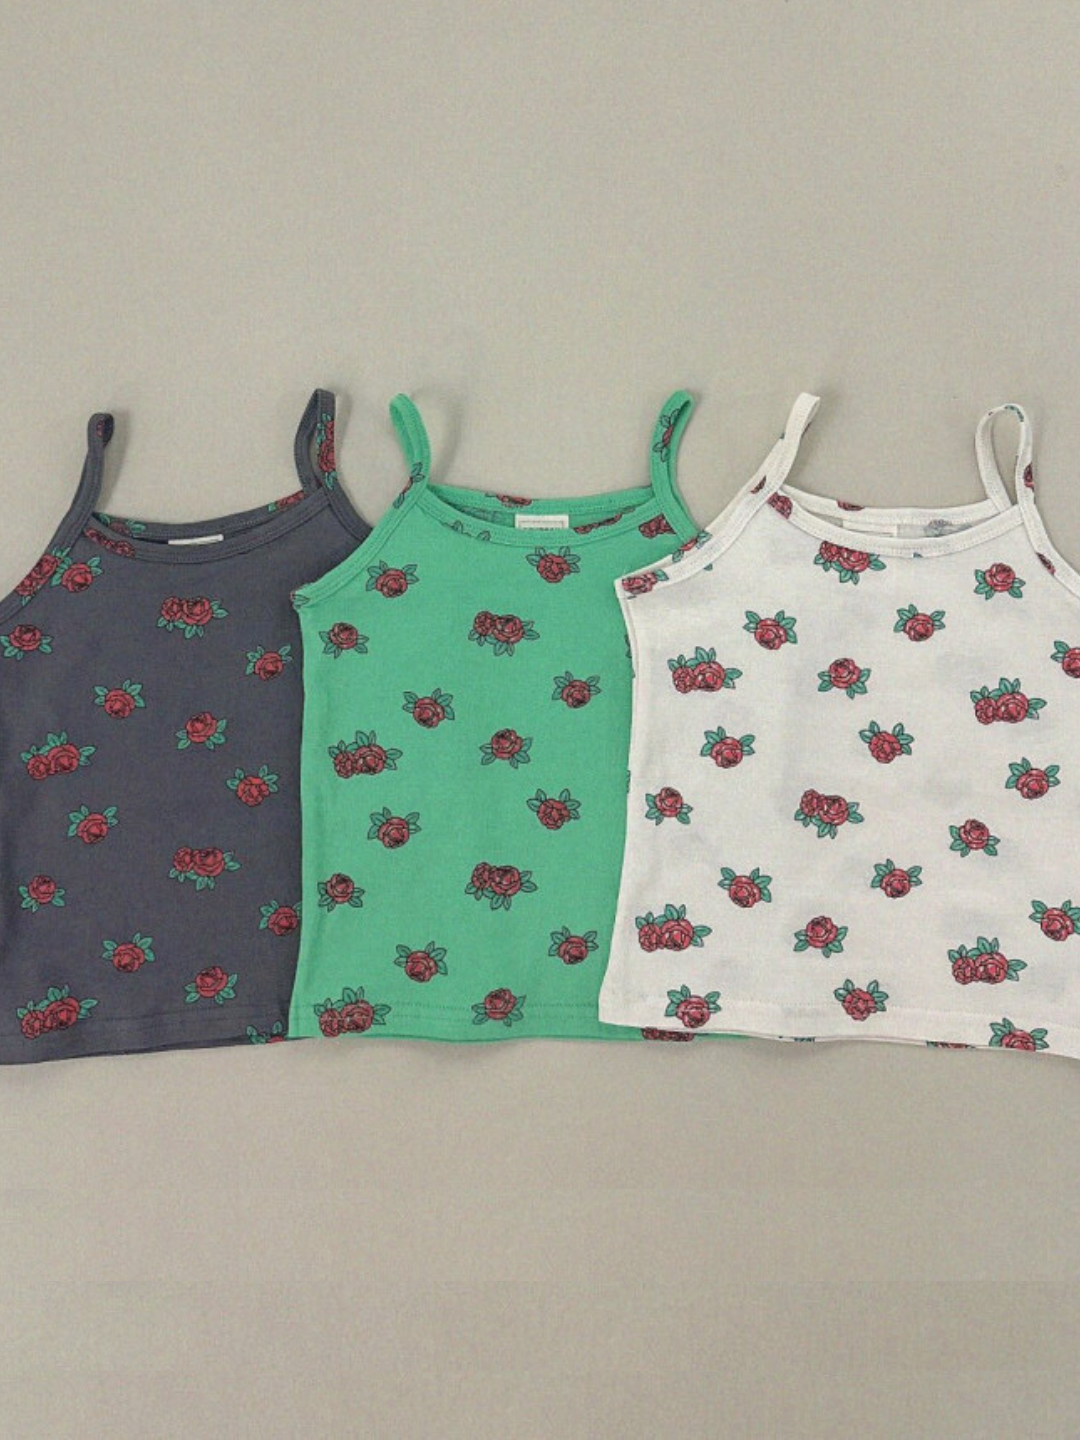 Charcoal | Three color ward of the kids' roses tank tops are laid flat